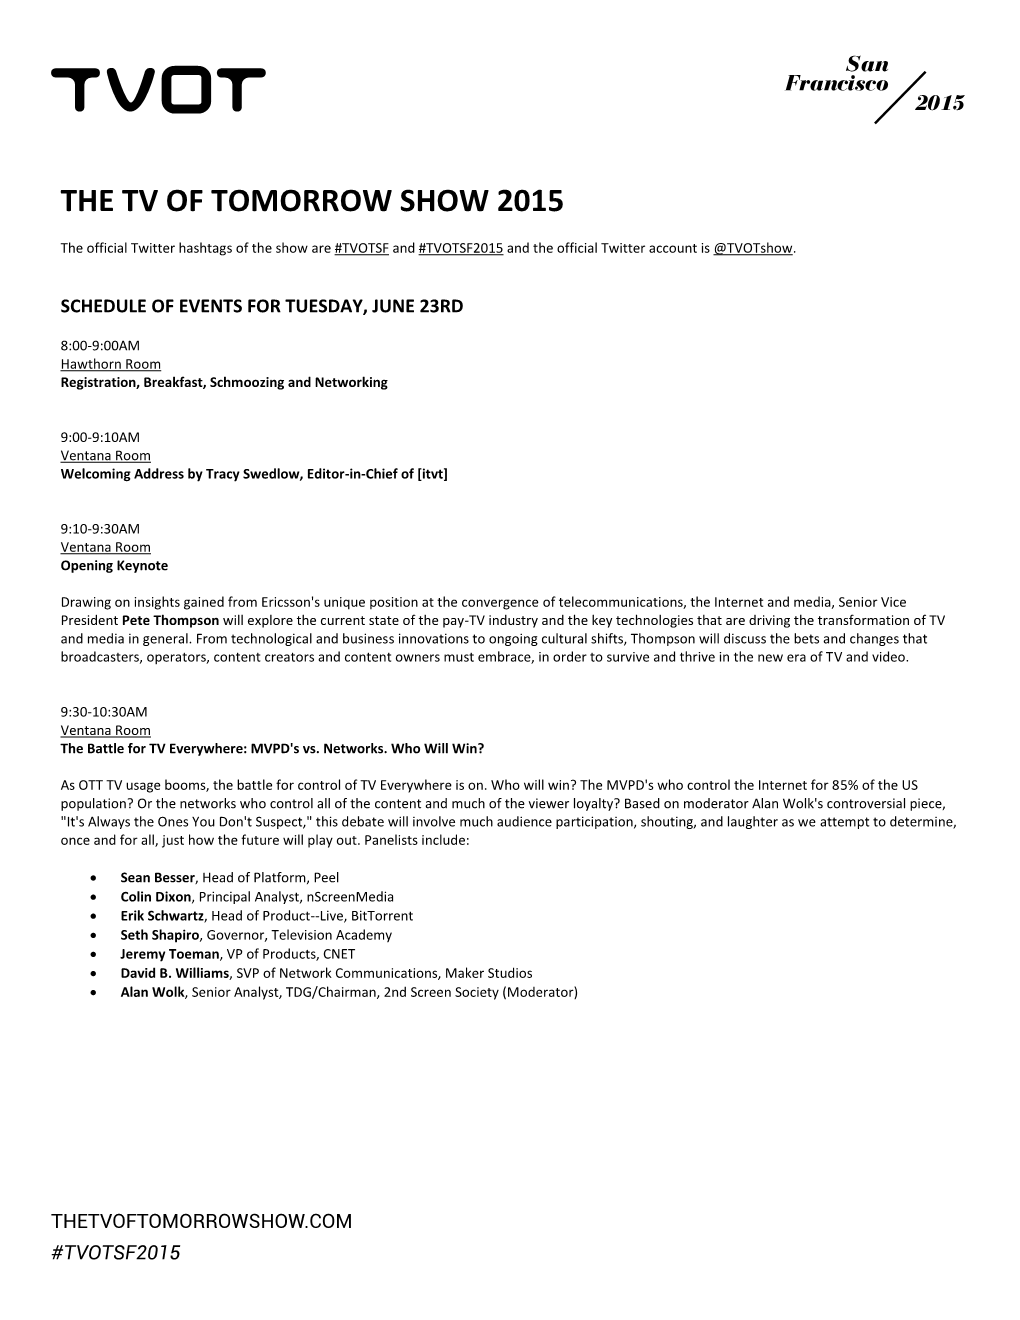 The Tv of Tomorrow Show 2015